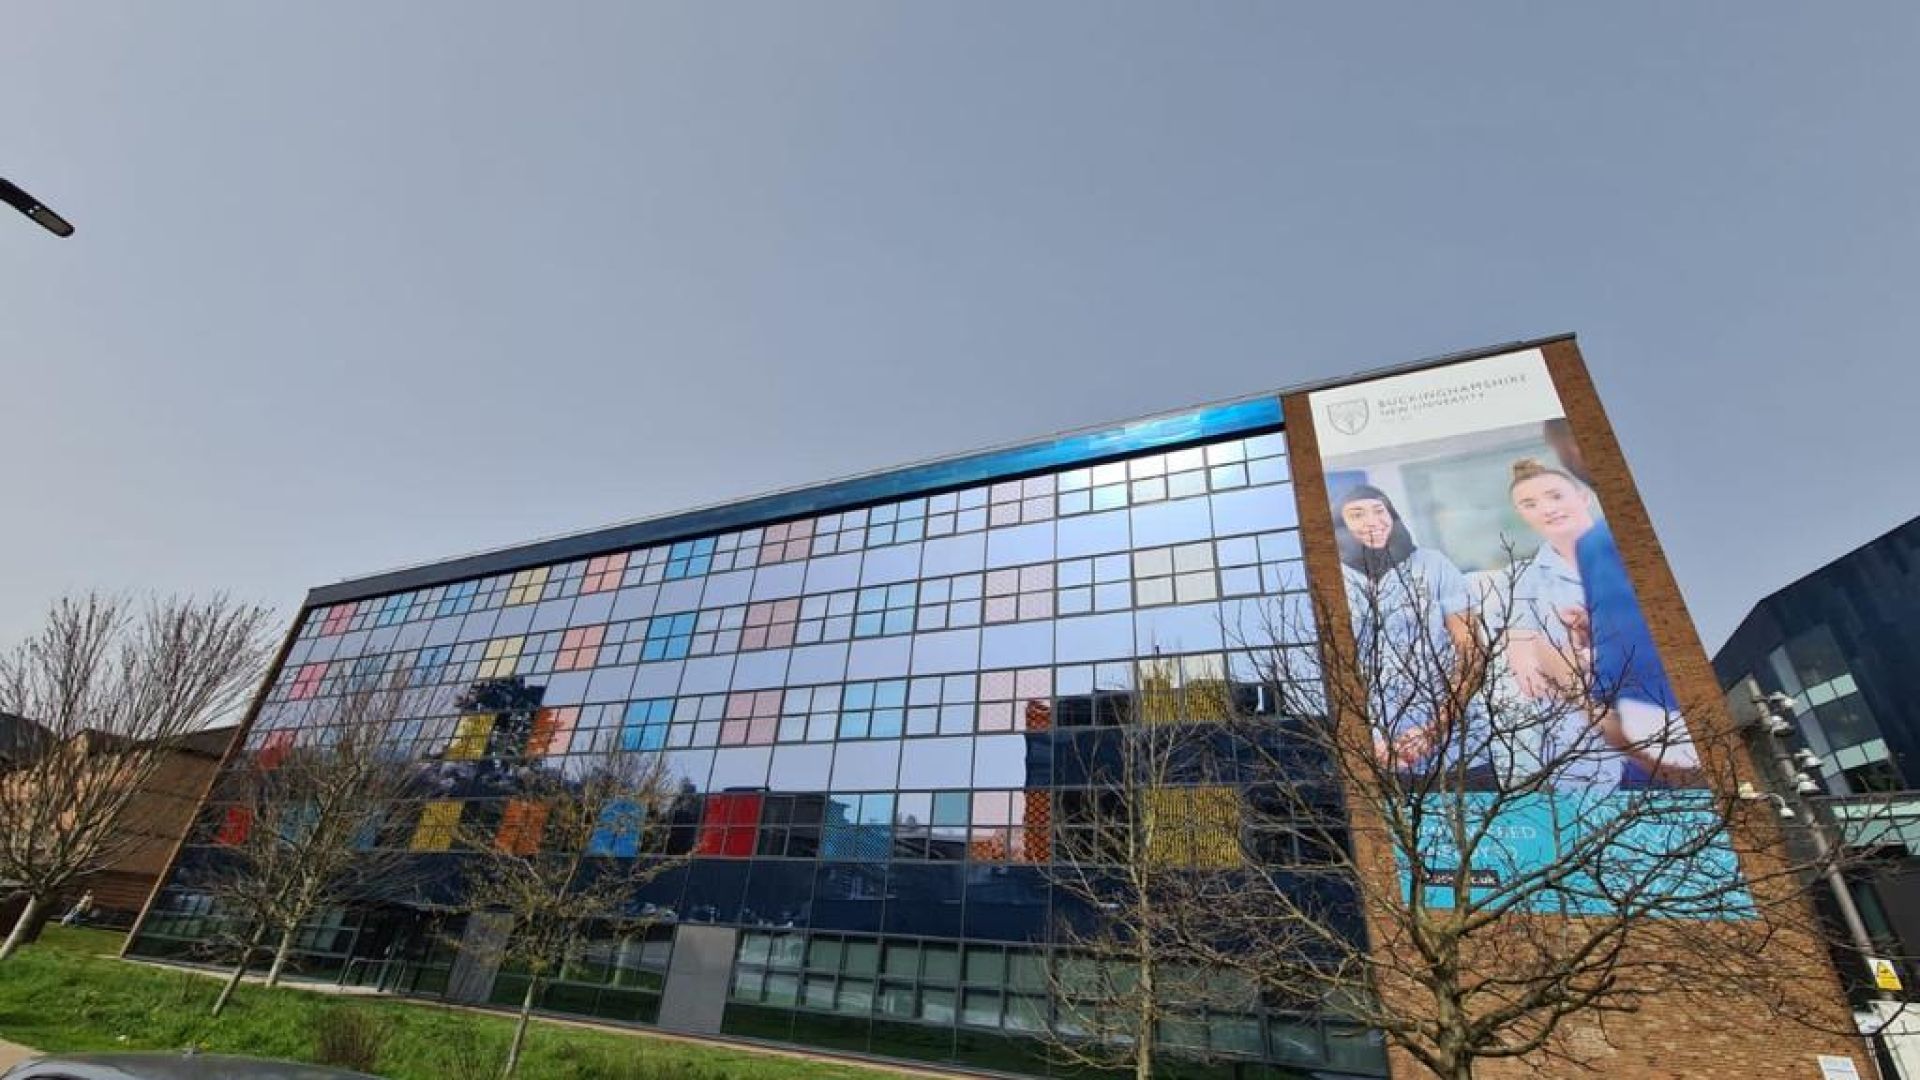 High Wycombe Campus New Branding